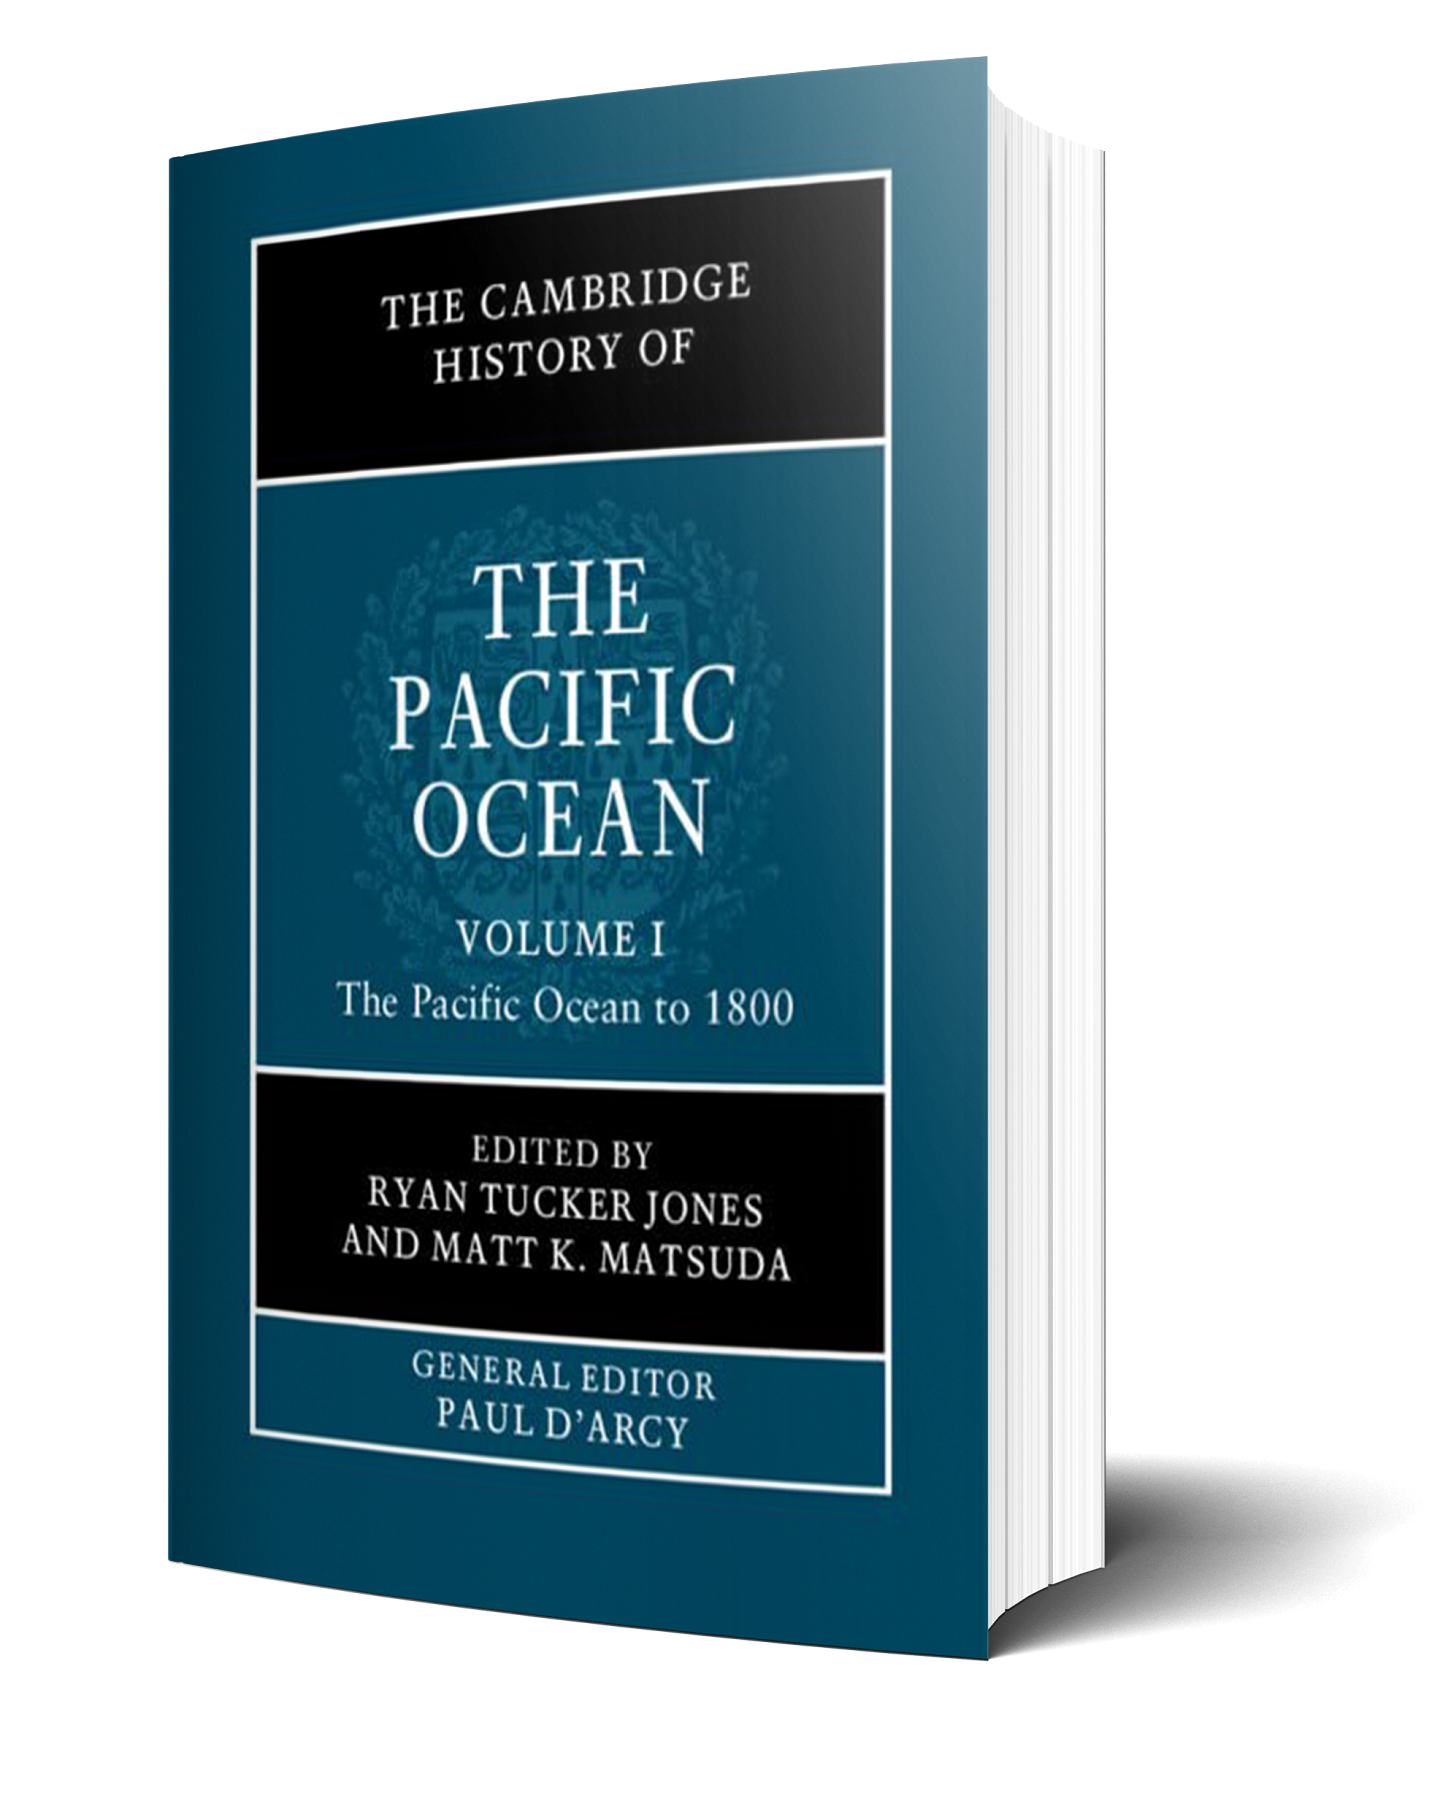 The Cambridge History of the Pacific Ocean: Volume 1: The Pacific Ocean to 1800